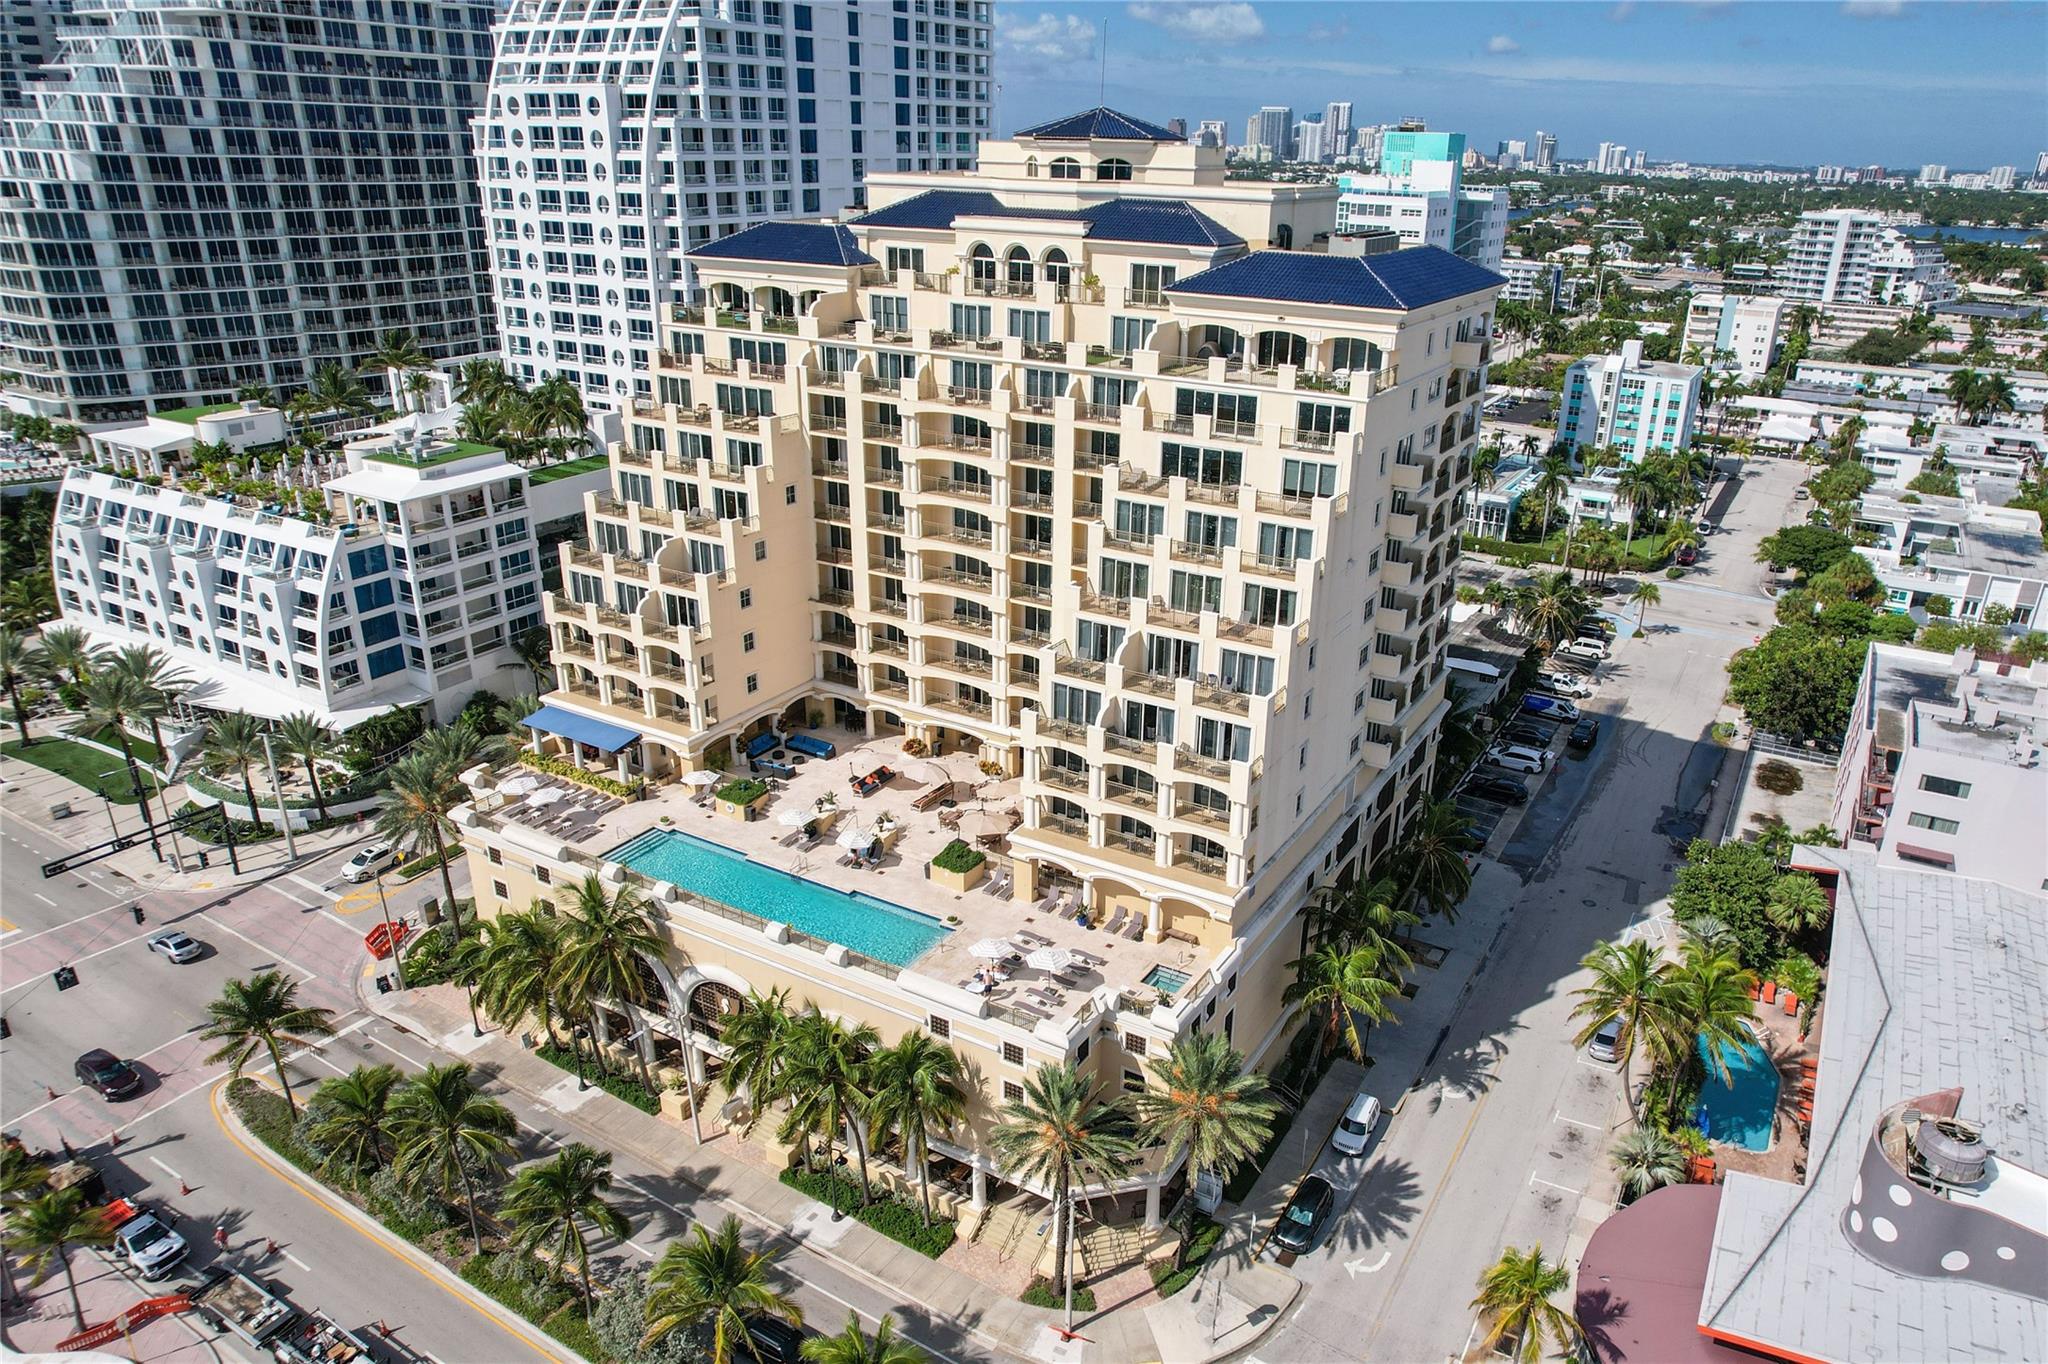 Property featured in Waterfront Condos in - Ft. Lauderdale under 1M #1